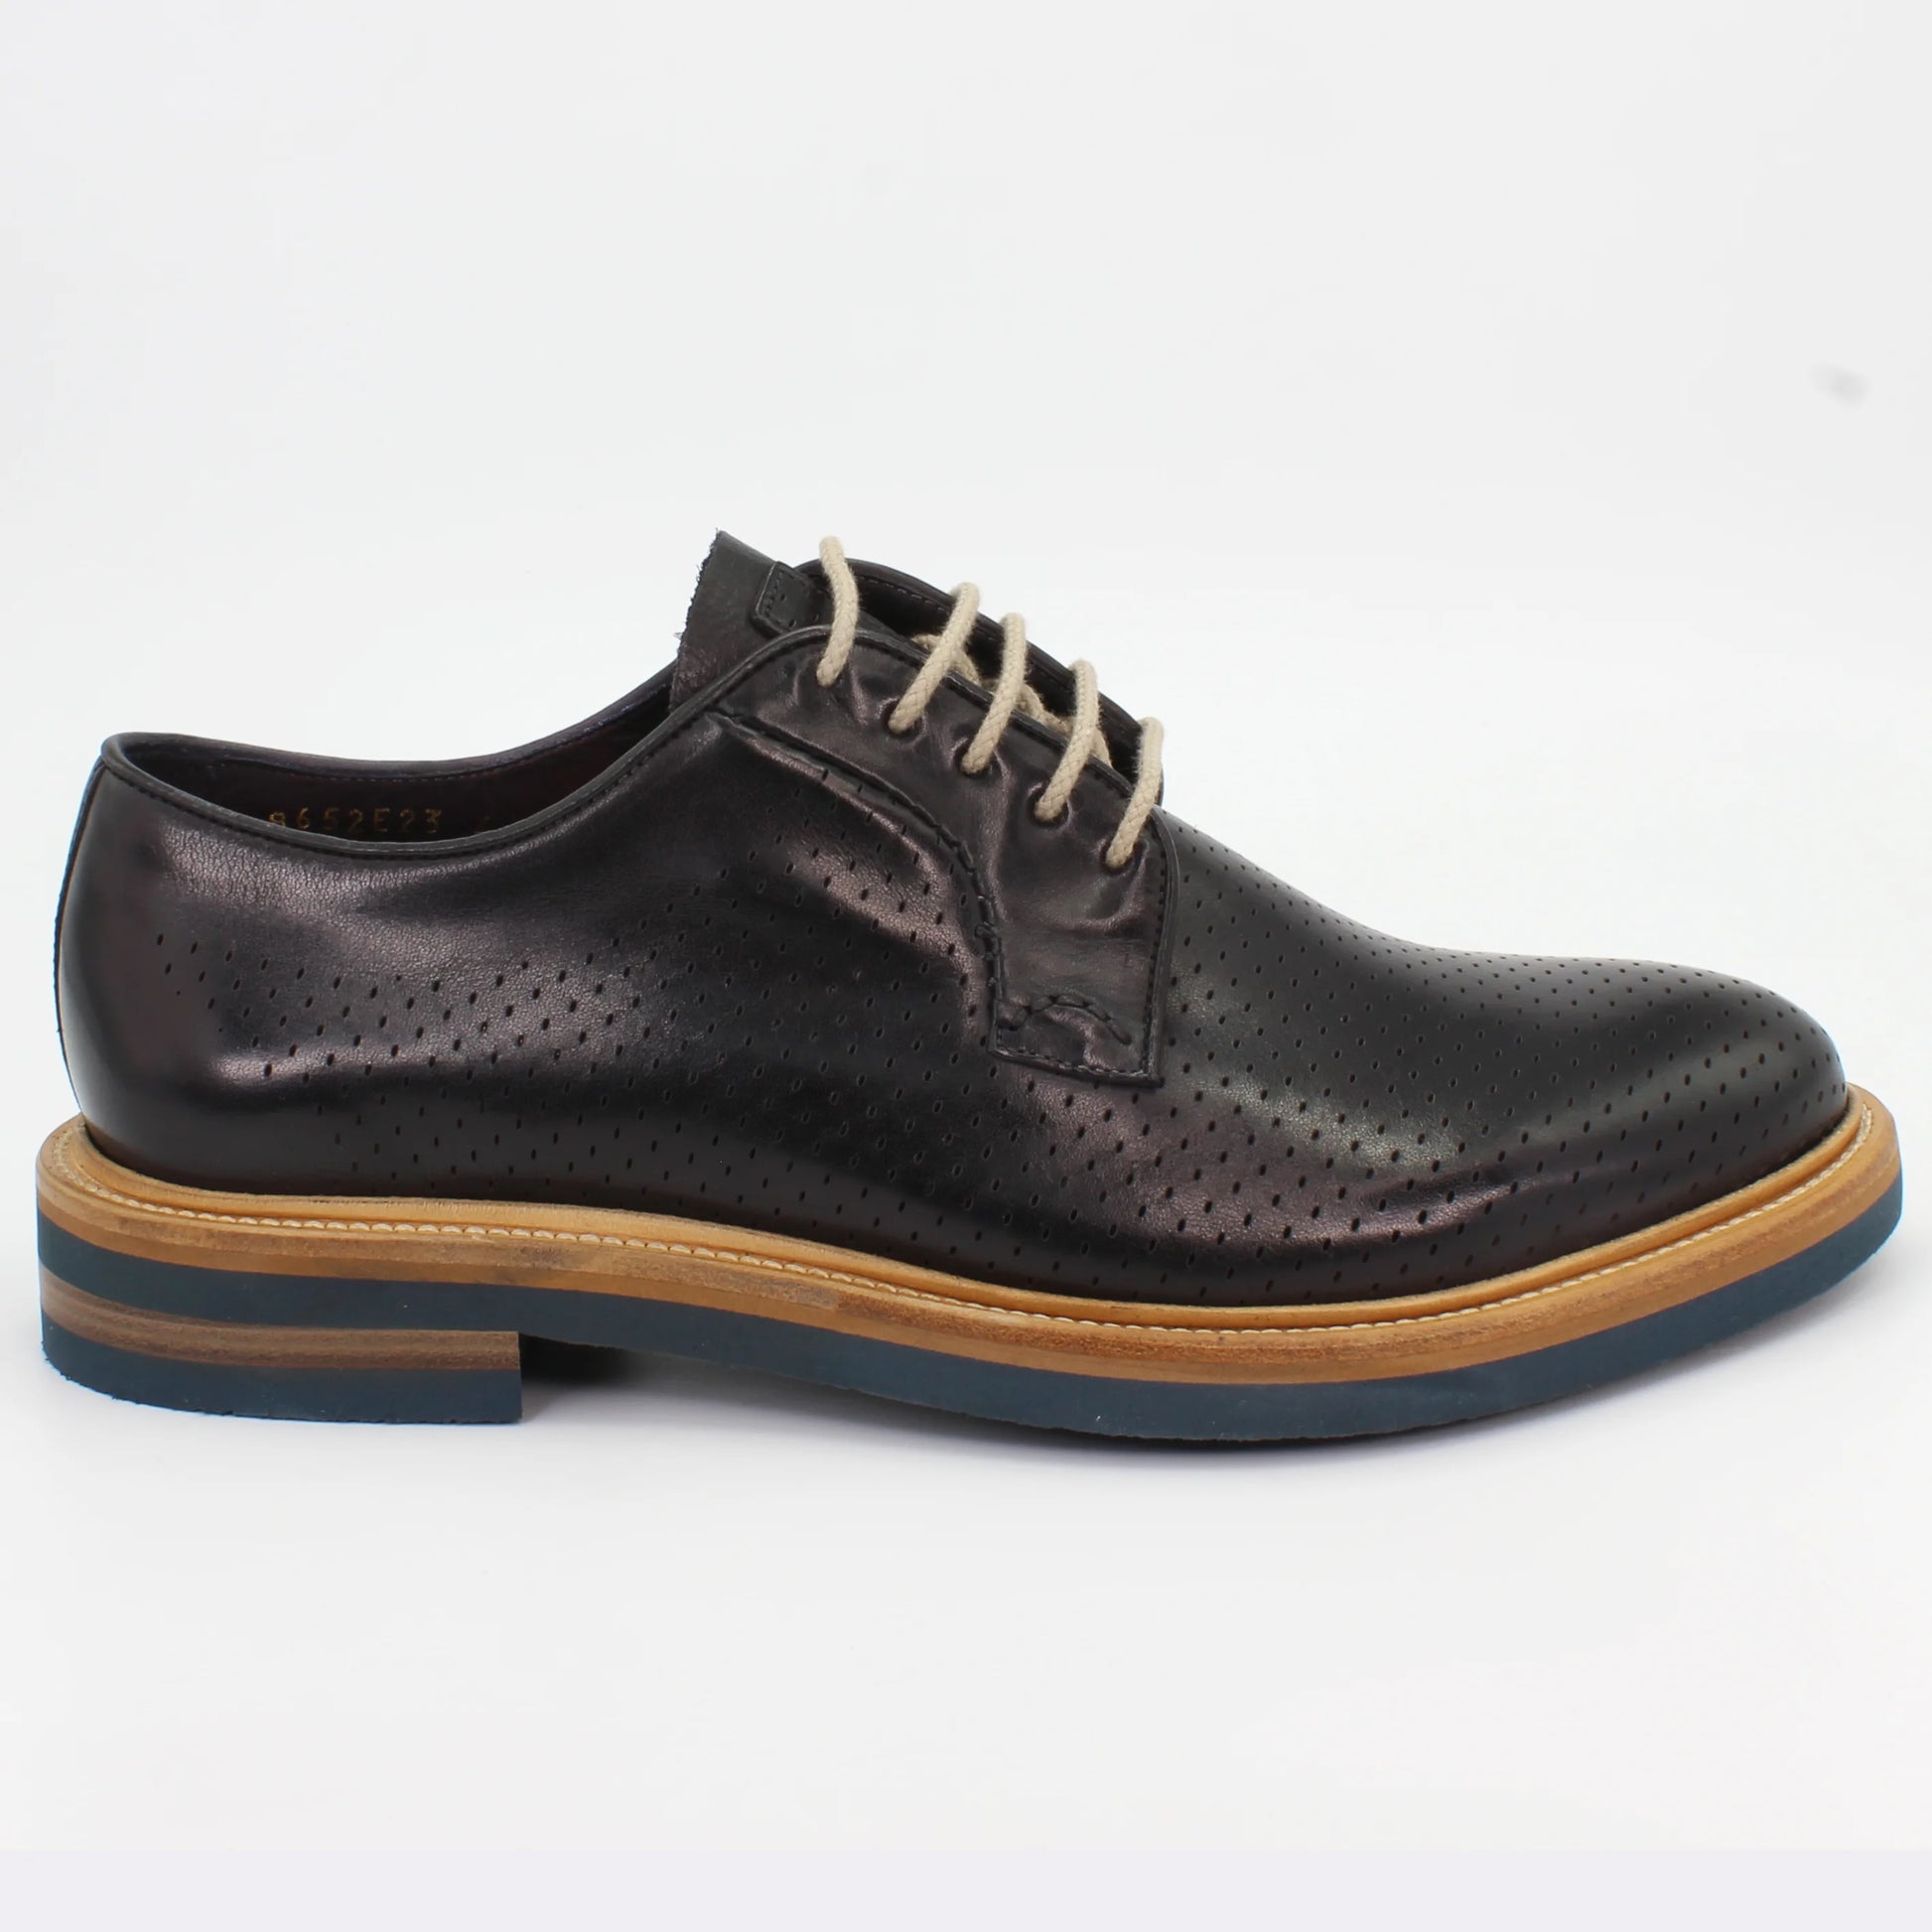 Shop Handmade Italian Leather derby in ink blue (BRU8652) or browse our range of hand-made Italian shoes for men in leather or suede in-store at Aliverti Cape Town, or shop online. We deliver in South Africa & offer multiple payment plans as well as accept multiple safe & secure payment methods.